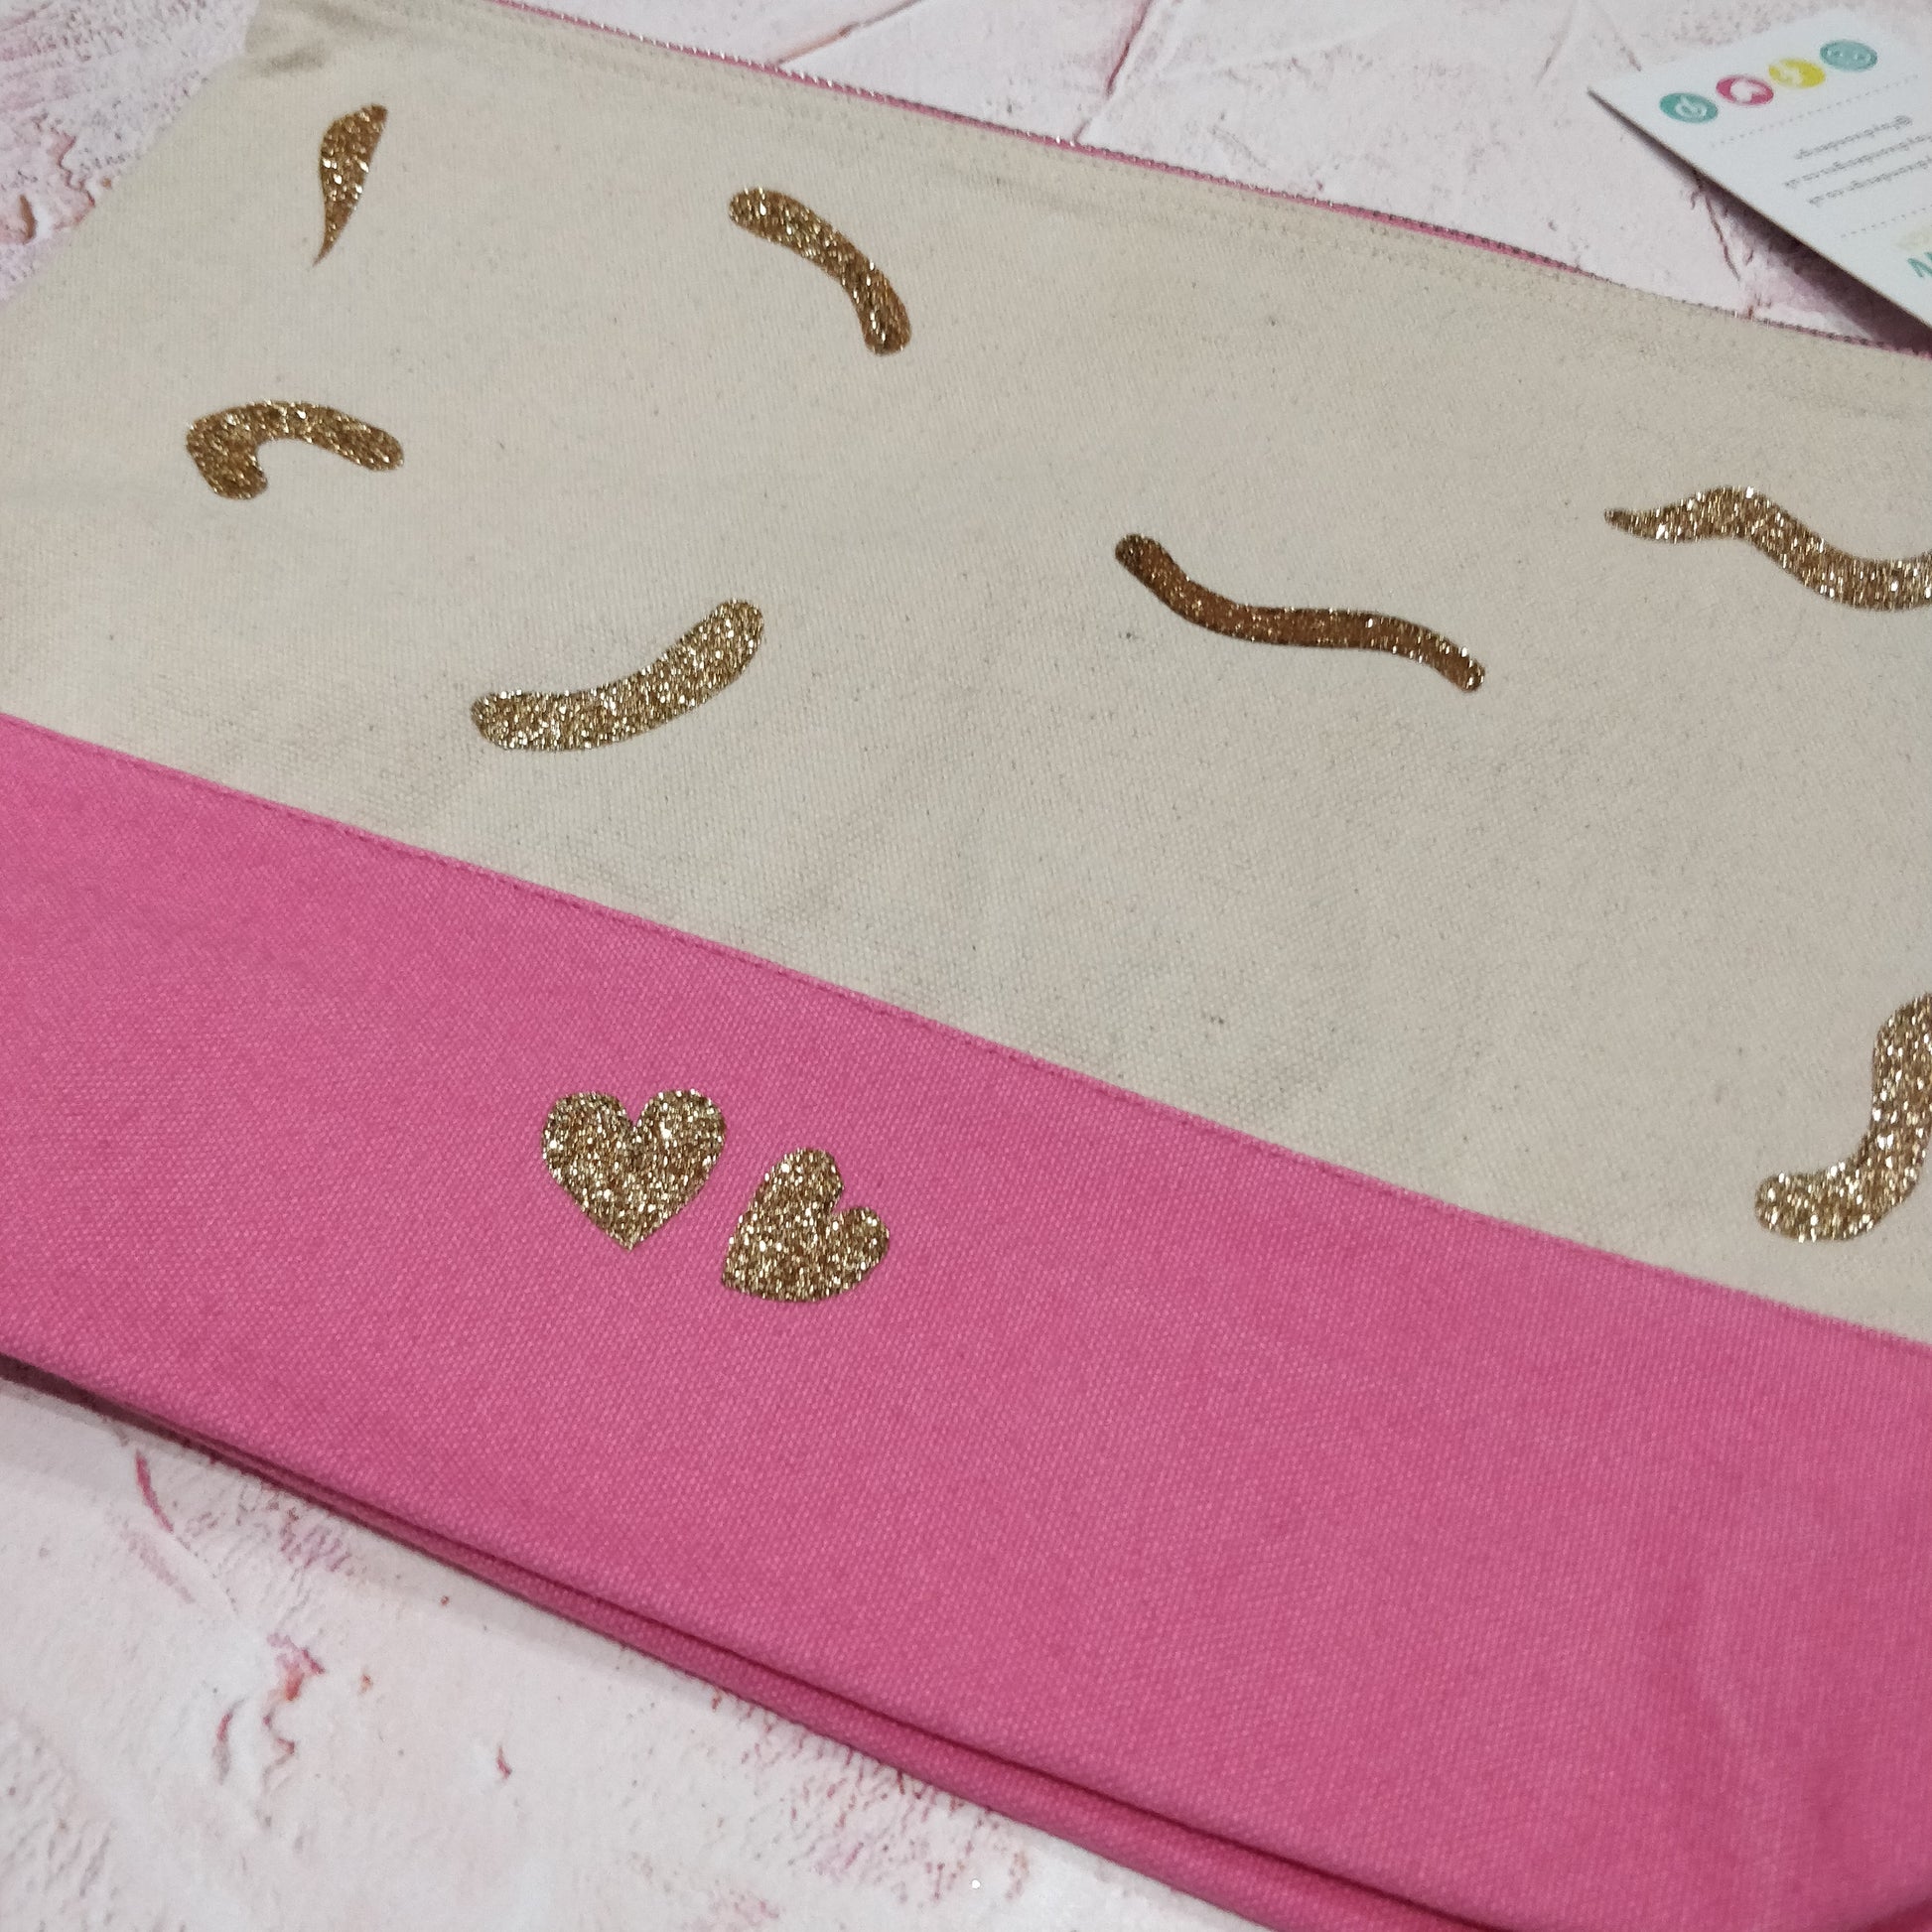 Pink and Gold Cotton Pouch - Fay Dixon Design